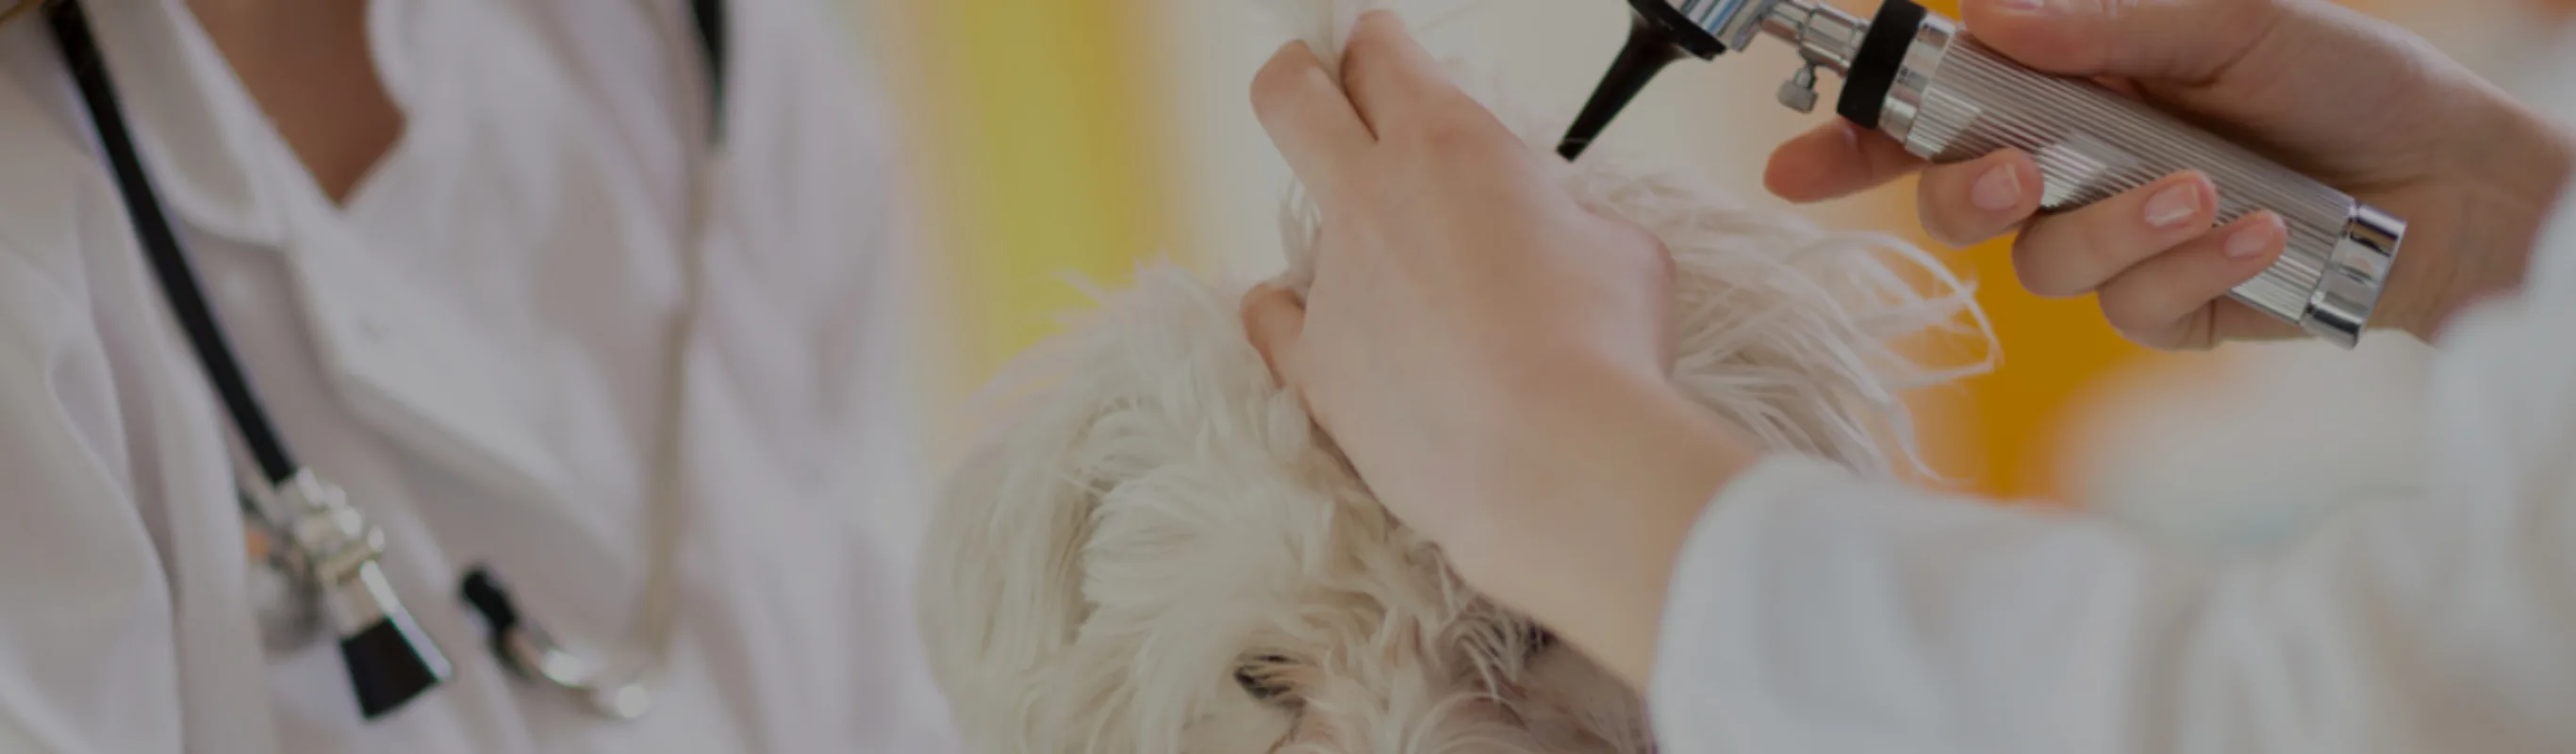 White fluffy dog getting its ear checked by a veterinarian